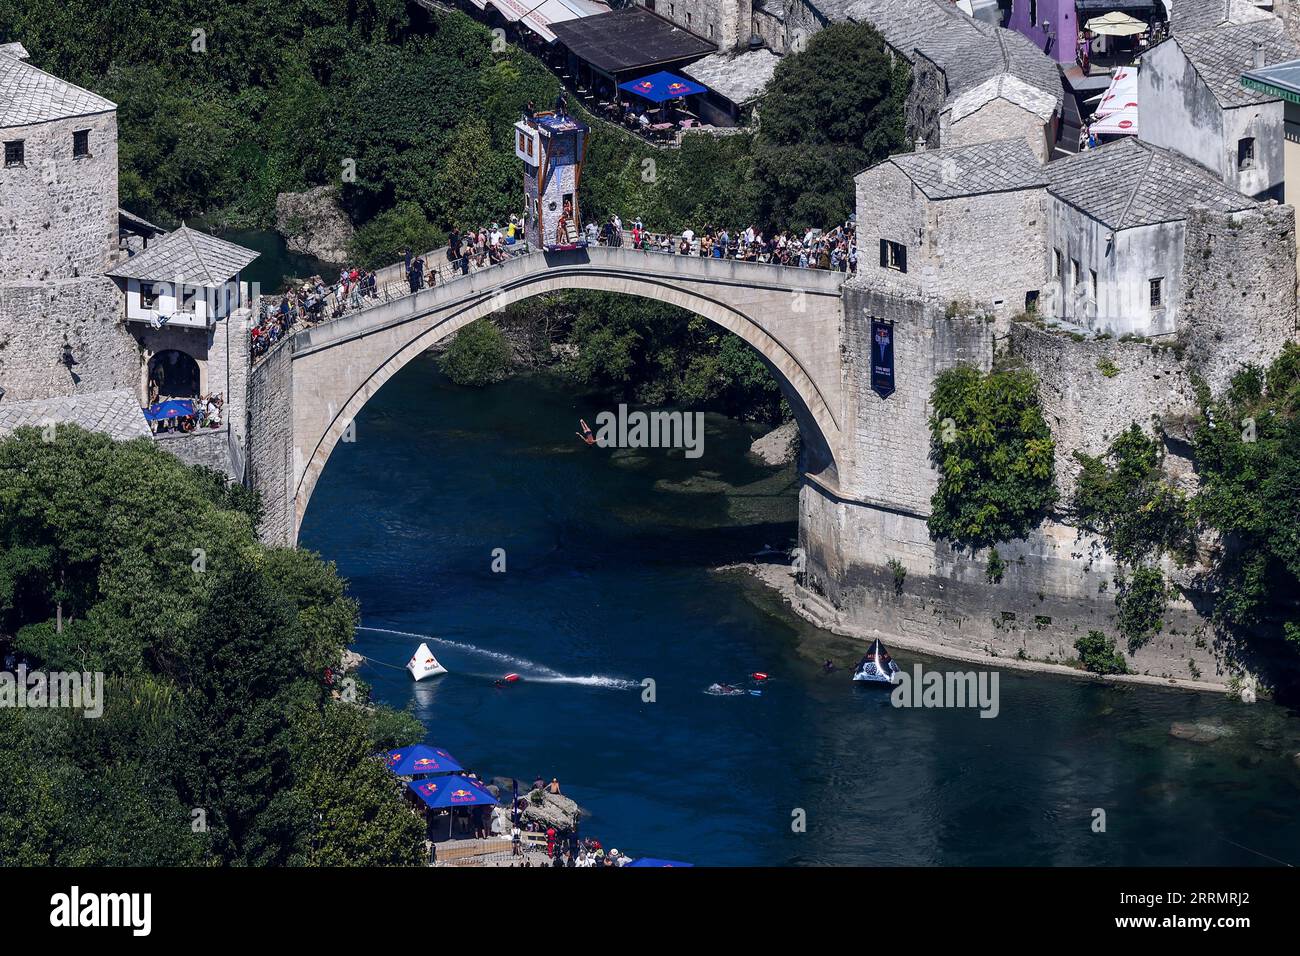 Competition of the Red Bull Cliff Diving World Championship 2023 in Mostar held on September 8, 2023. The city's 16th-century bridge, Old Bridge, once again hosts the elite cliff divers as they demonstrate ultimate courage, control and some insane athleticism over the emerald water of the Neretva River.This was the second series of jumps, as Canadian Molly Carlson and Romanian Catalin Preda kept the lead in the competition. Photo: Denis Kapetanovic /PIXSELL Credit: Pixsell/Alamy Live News Stock Photo